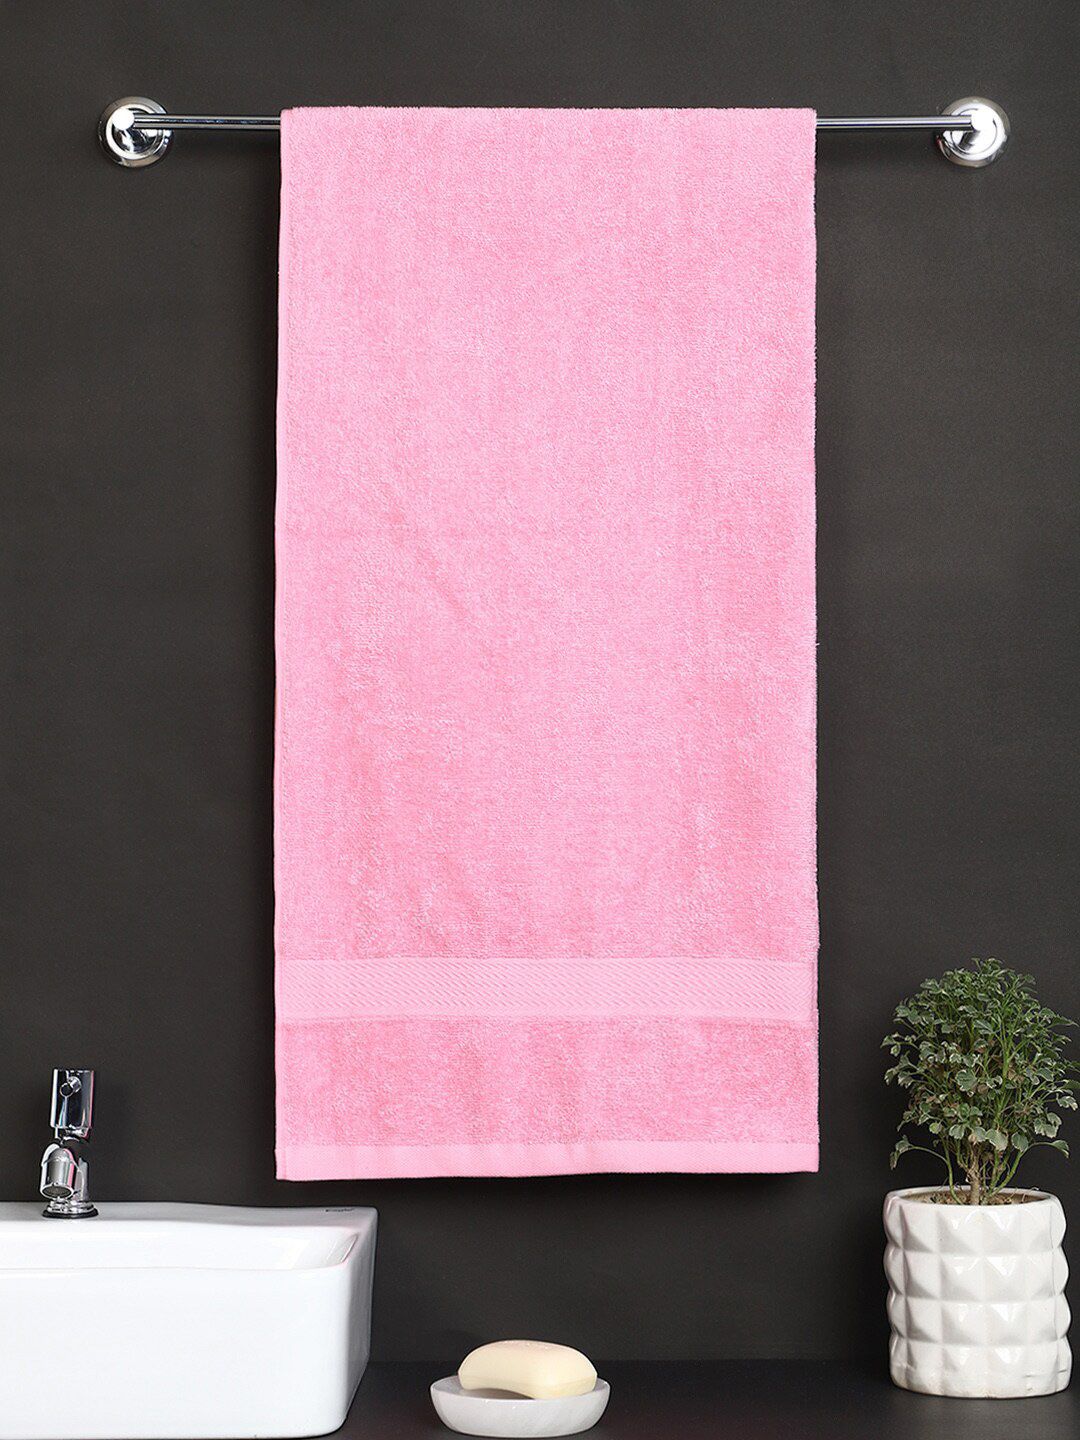 Raymond Home Pink Solid Pure Cotton 380 Gsm Bath Towels Price in India